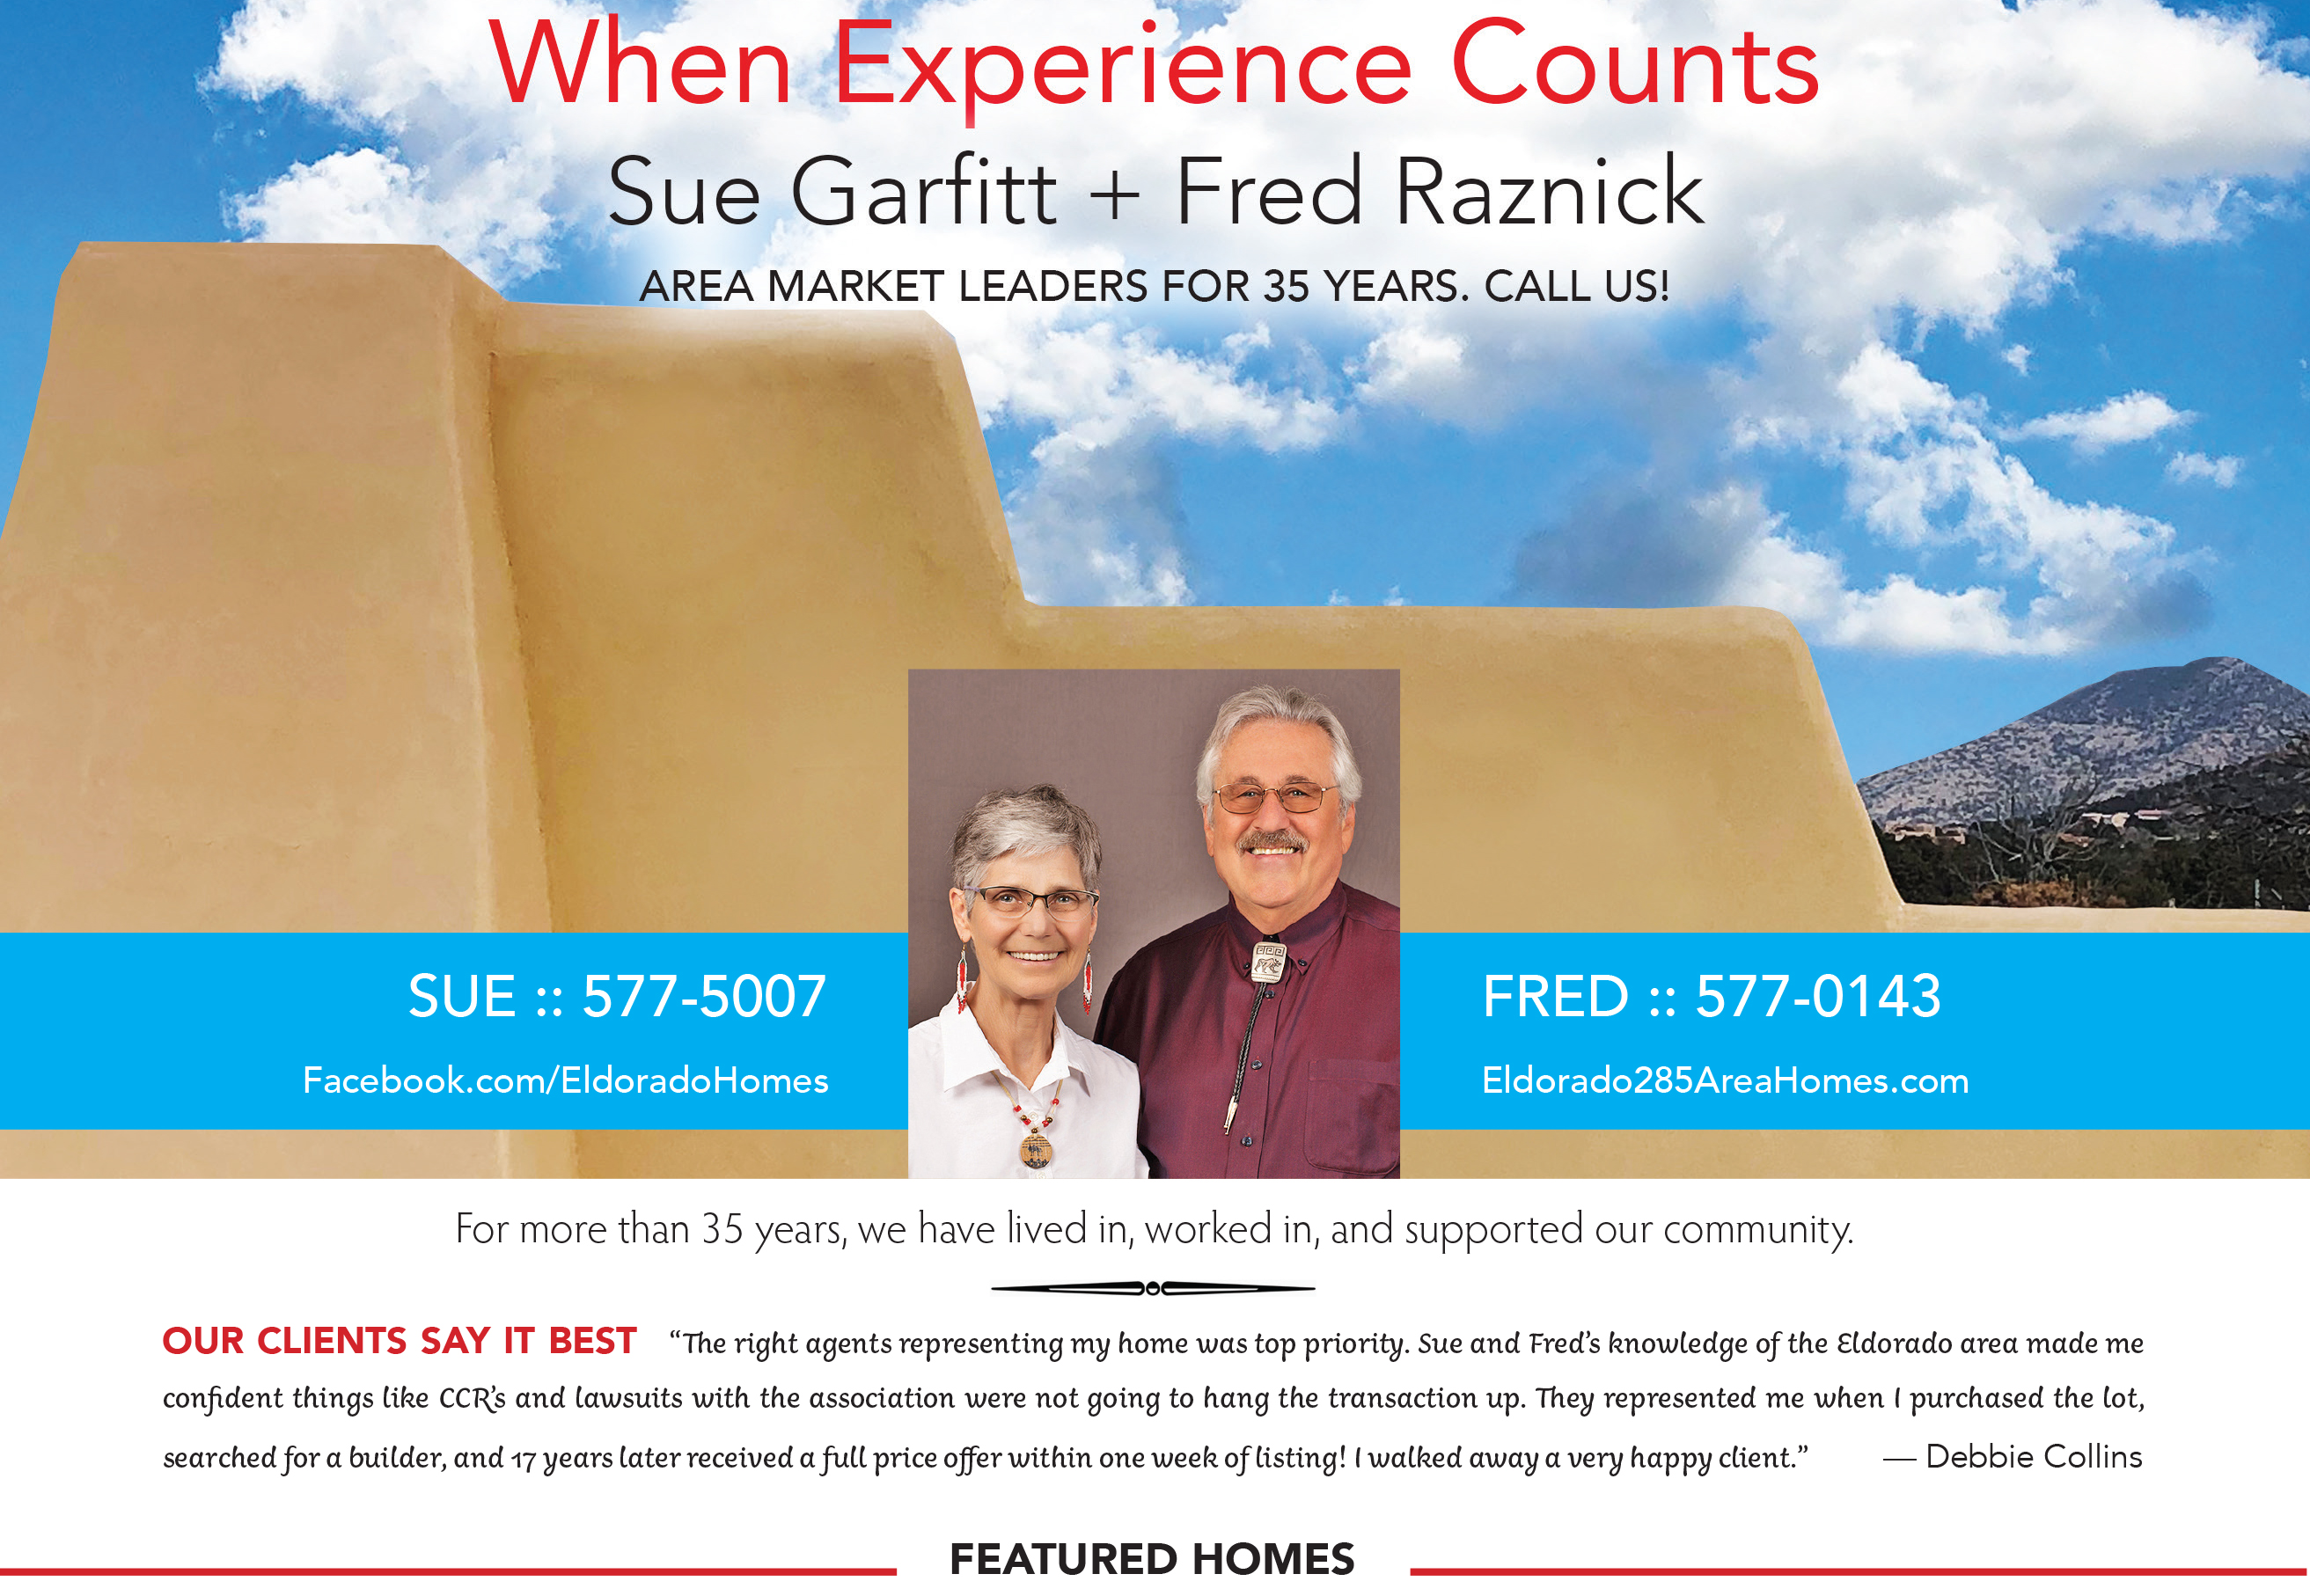 Have you seen our ad in the May issue of Eldorado Living?